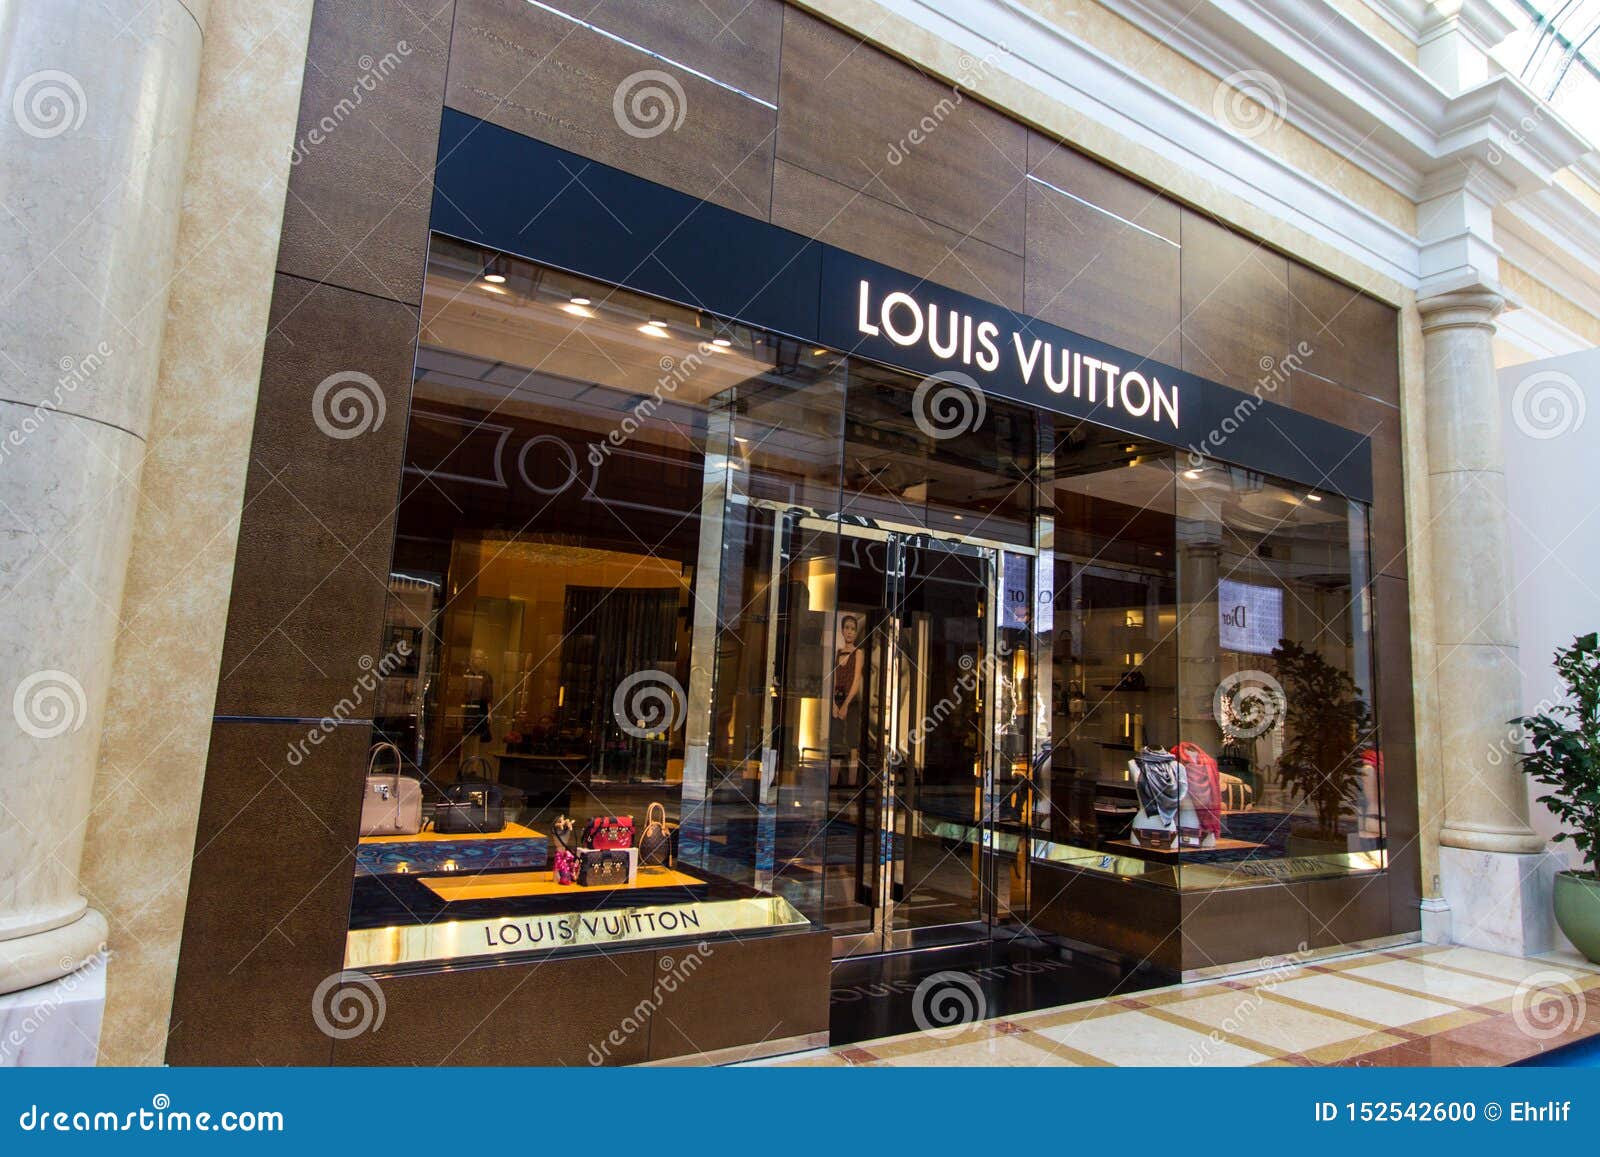 Exterior Of Louis Vuitton Store In Las Vegas Nevada Editorial Image - Image of entrance, luxury ...